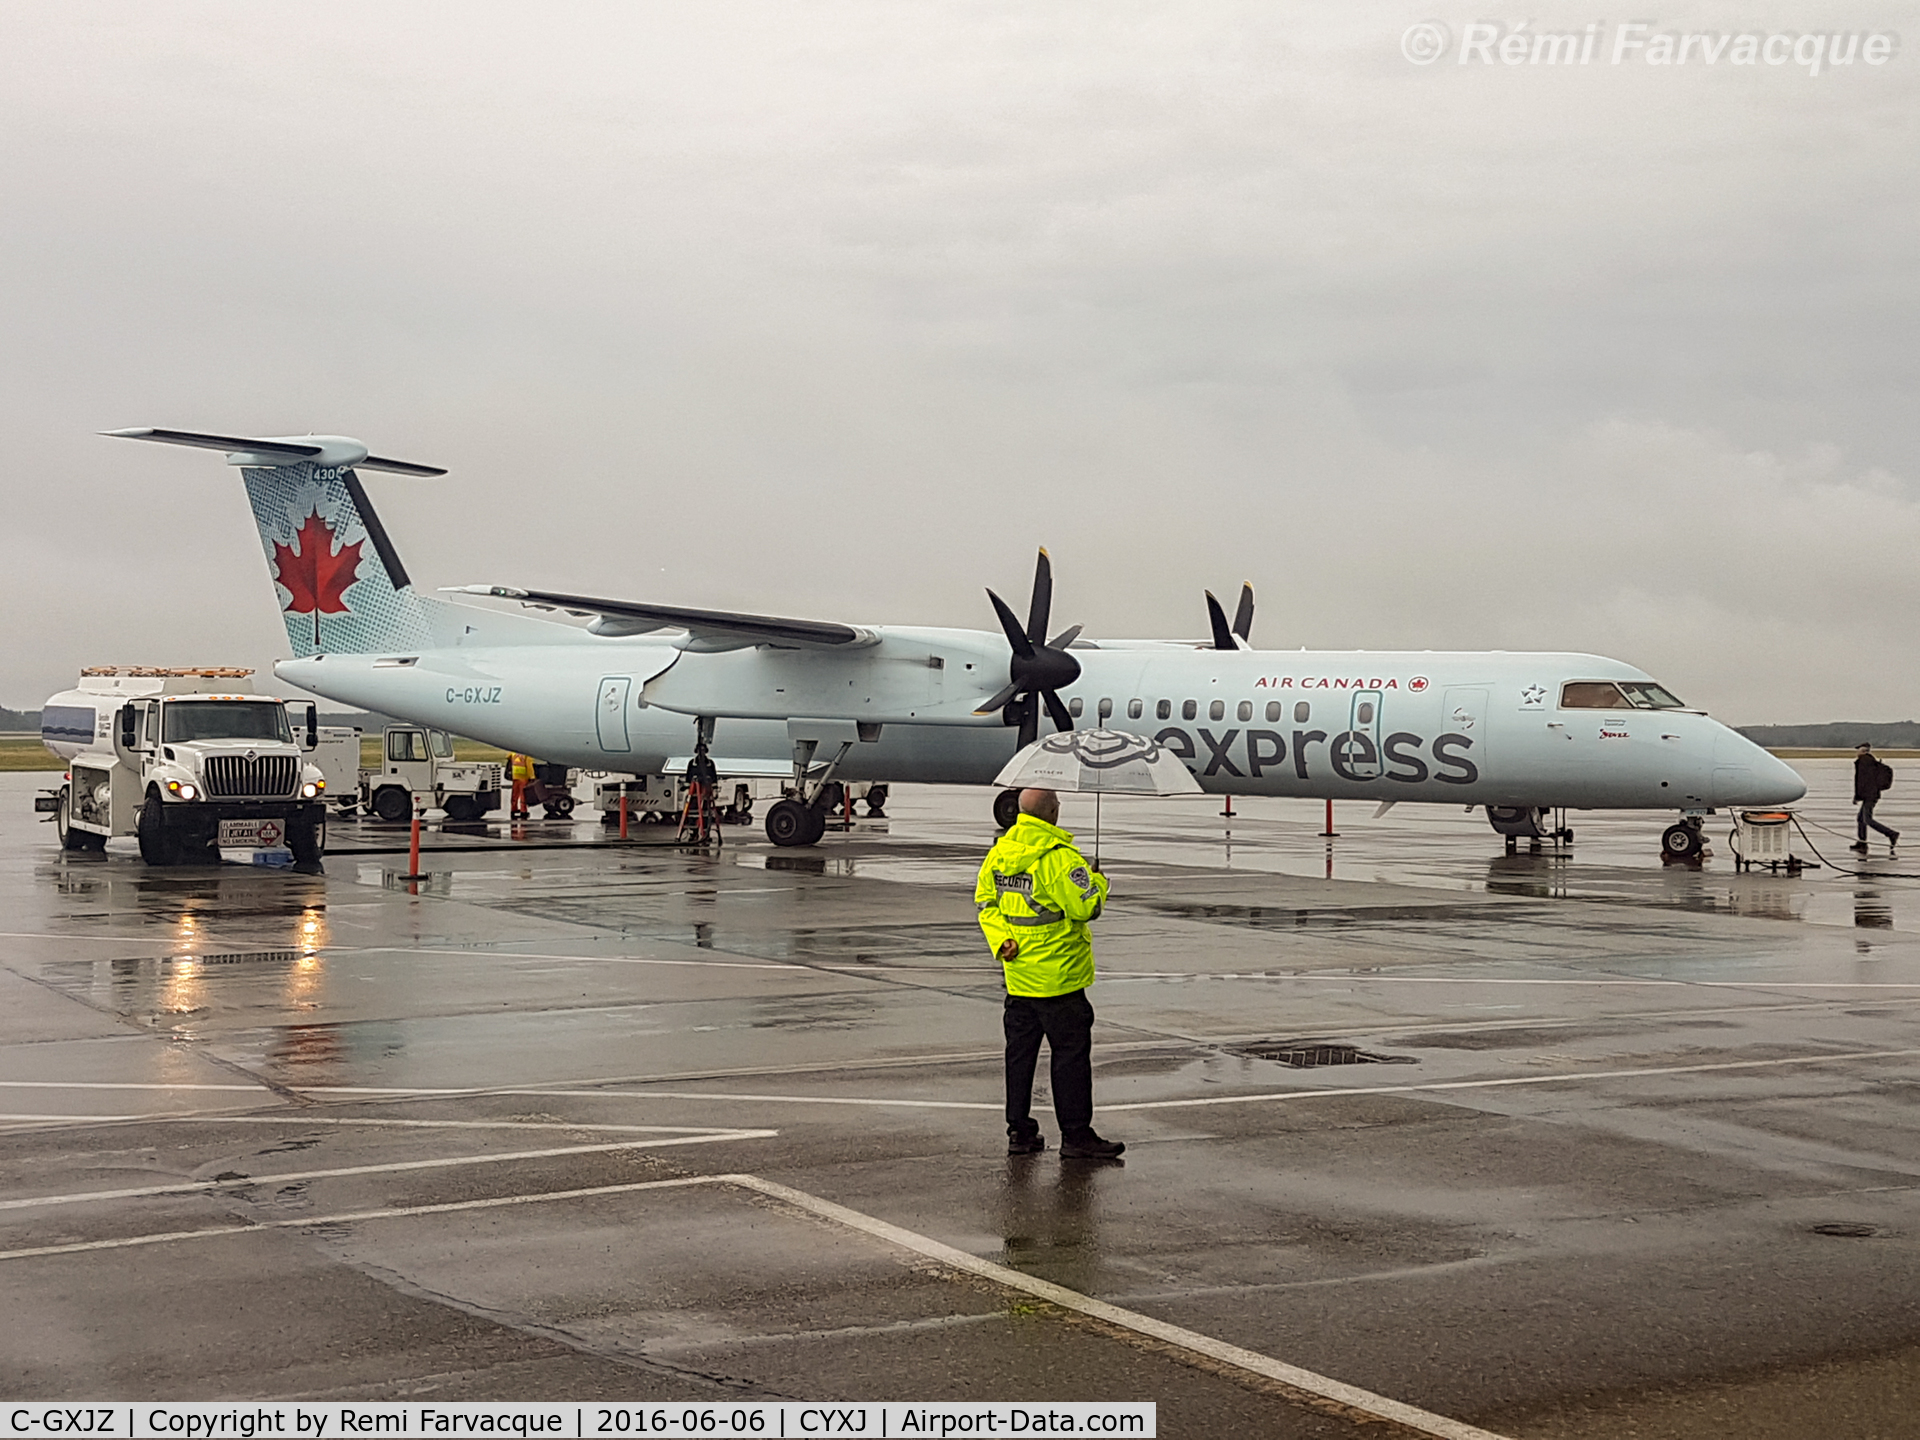 C-GXJZ, 2016 De Havilland Canada DHC-8-402 Dash 8 C/N 4523, Loading and fueling. AC plane #430. According to records this plane was not registered to Air Canada on this date.